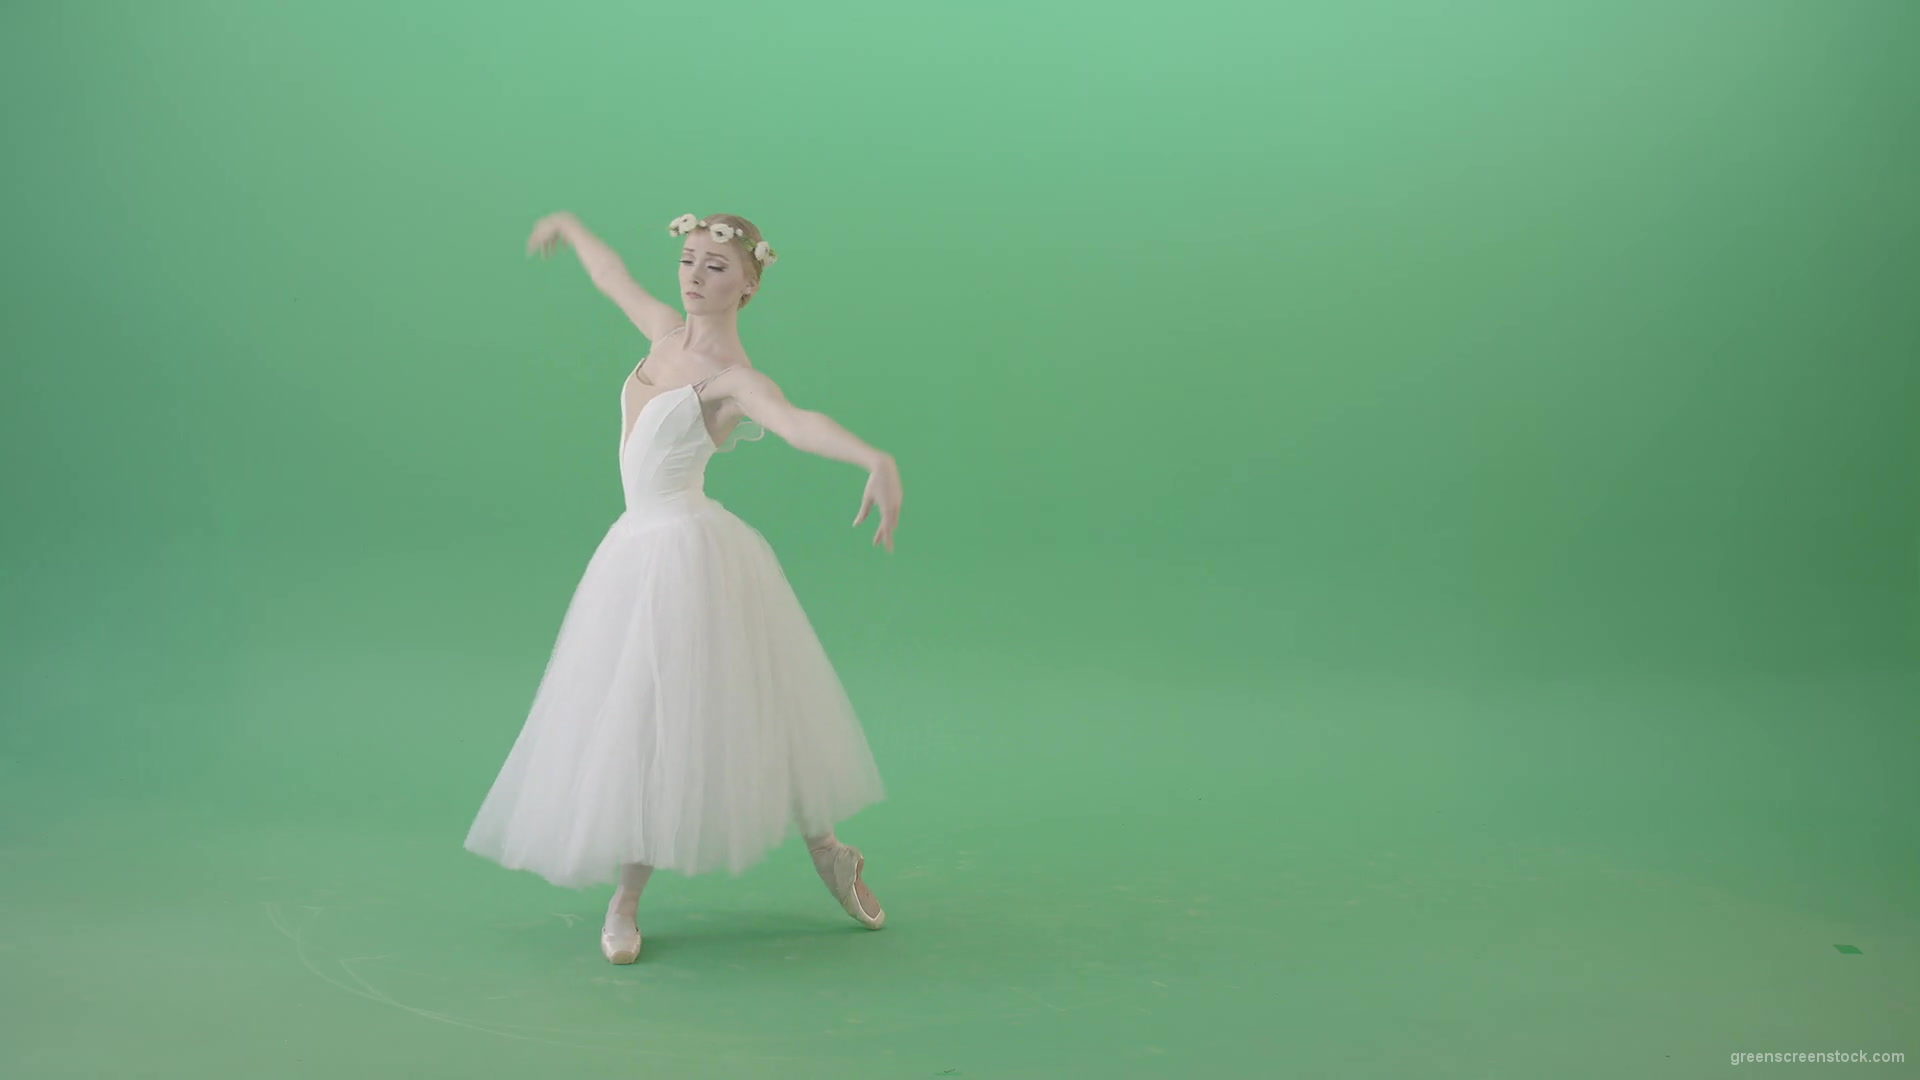 Blonde-Girl-in-elegant-white-wedding-dress-mowing-away-and-dancing-ballet-art-isolated-on-green-screen-4K-Video-Footage-1920_007 Green Screen Stock